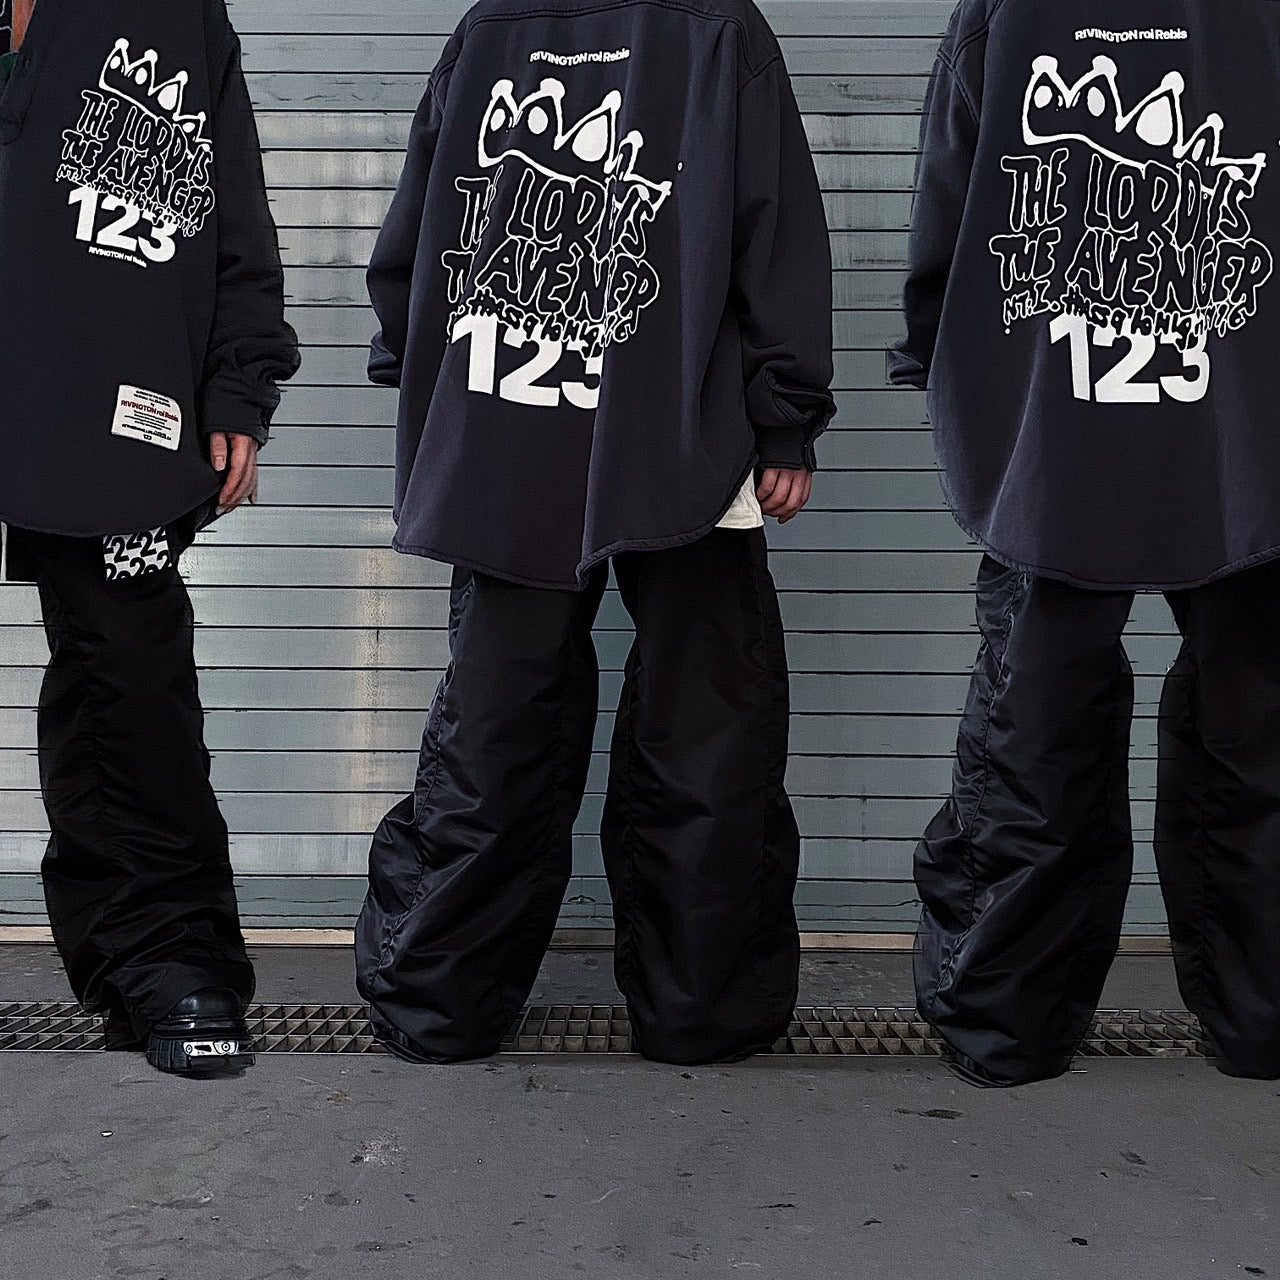 【RRR123】<br> New tops and bottoms line up! Check out the latest 23SS items!